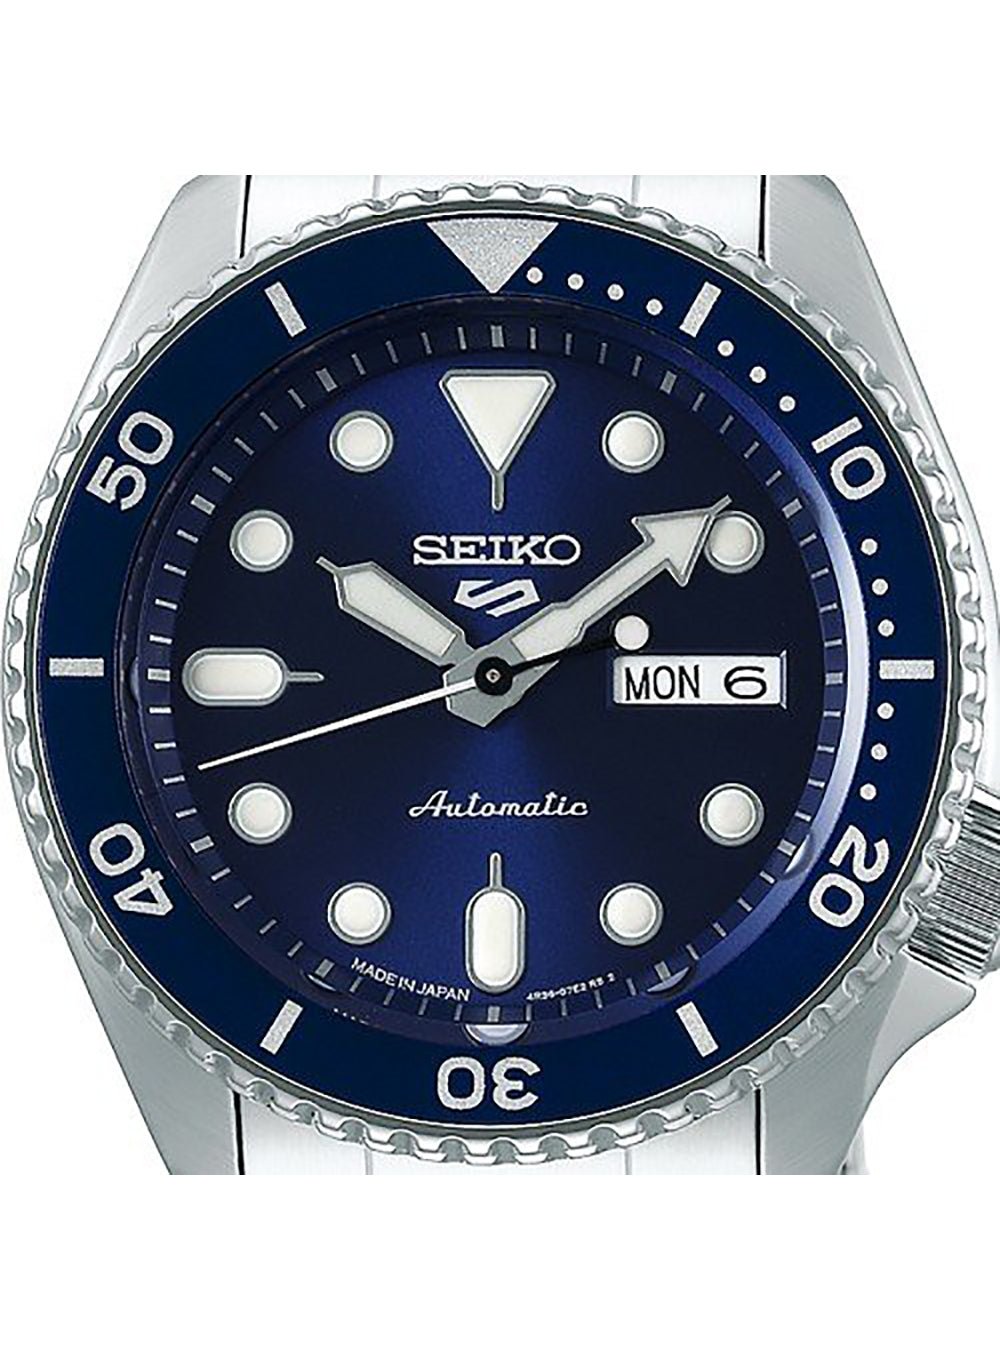 Seiko 5 Sports SBSA001 Automatic Watches Mechanical 2019 Made in japan JDMWRISTWATCHjapan-select